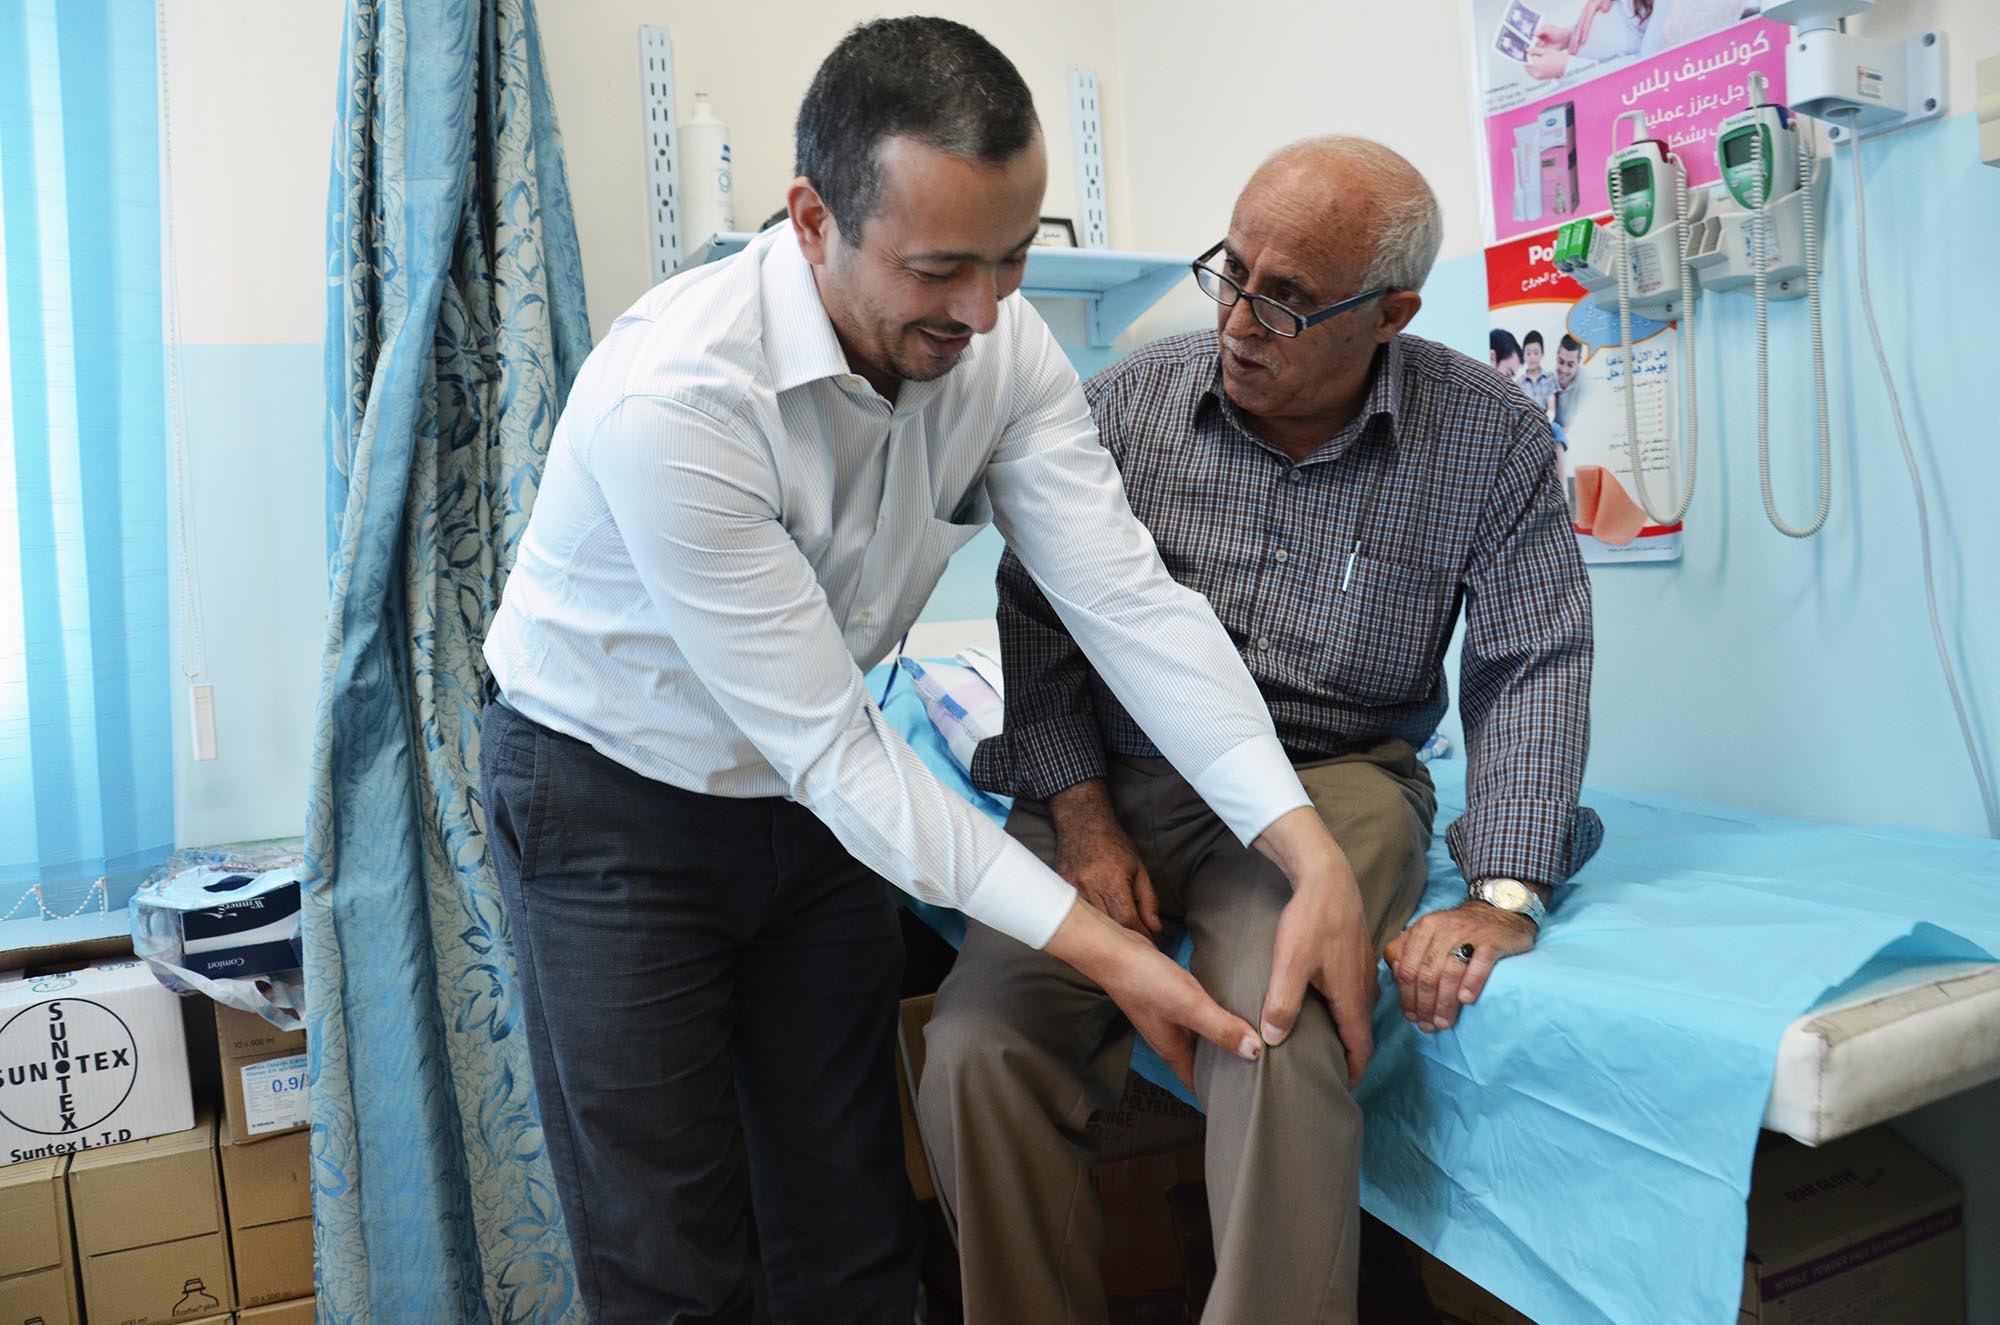 • The center and communities in Hebron feel blessed to have quality care they can depend on.